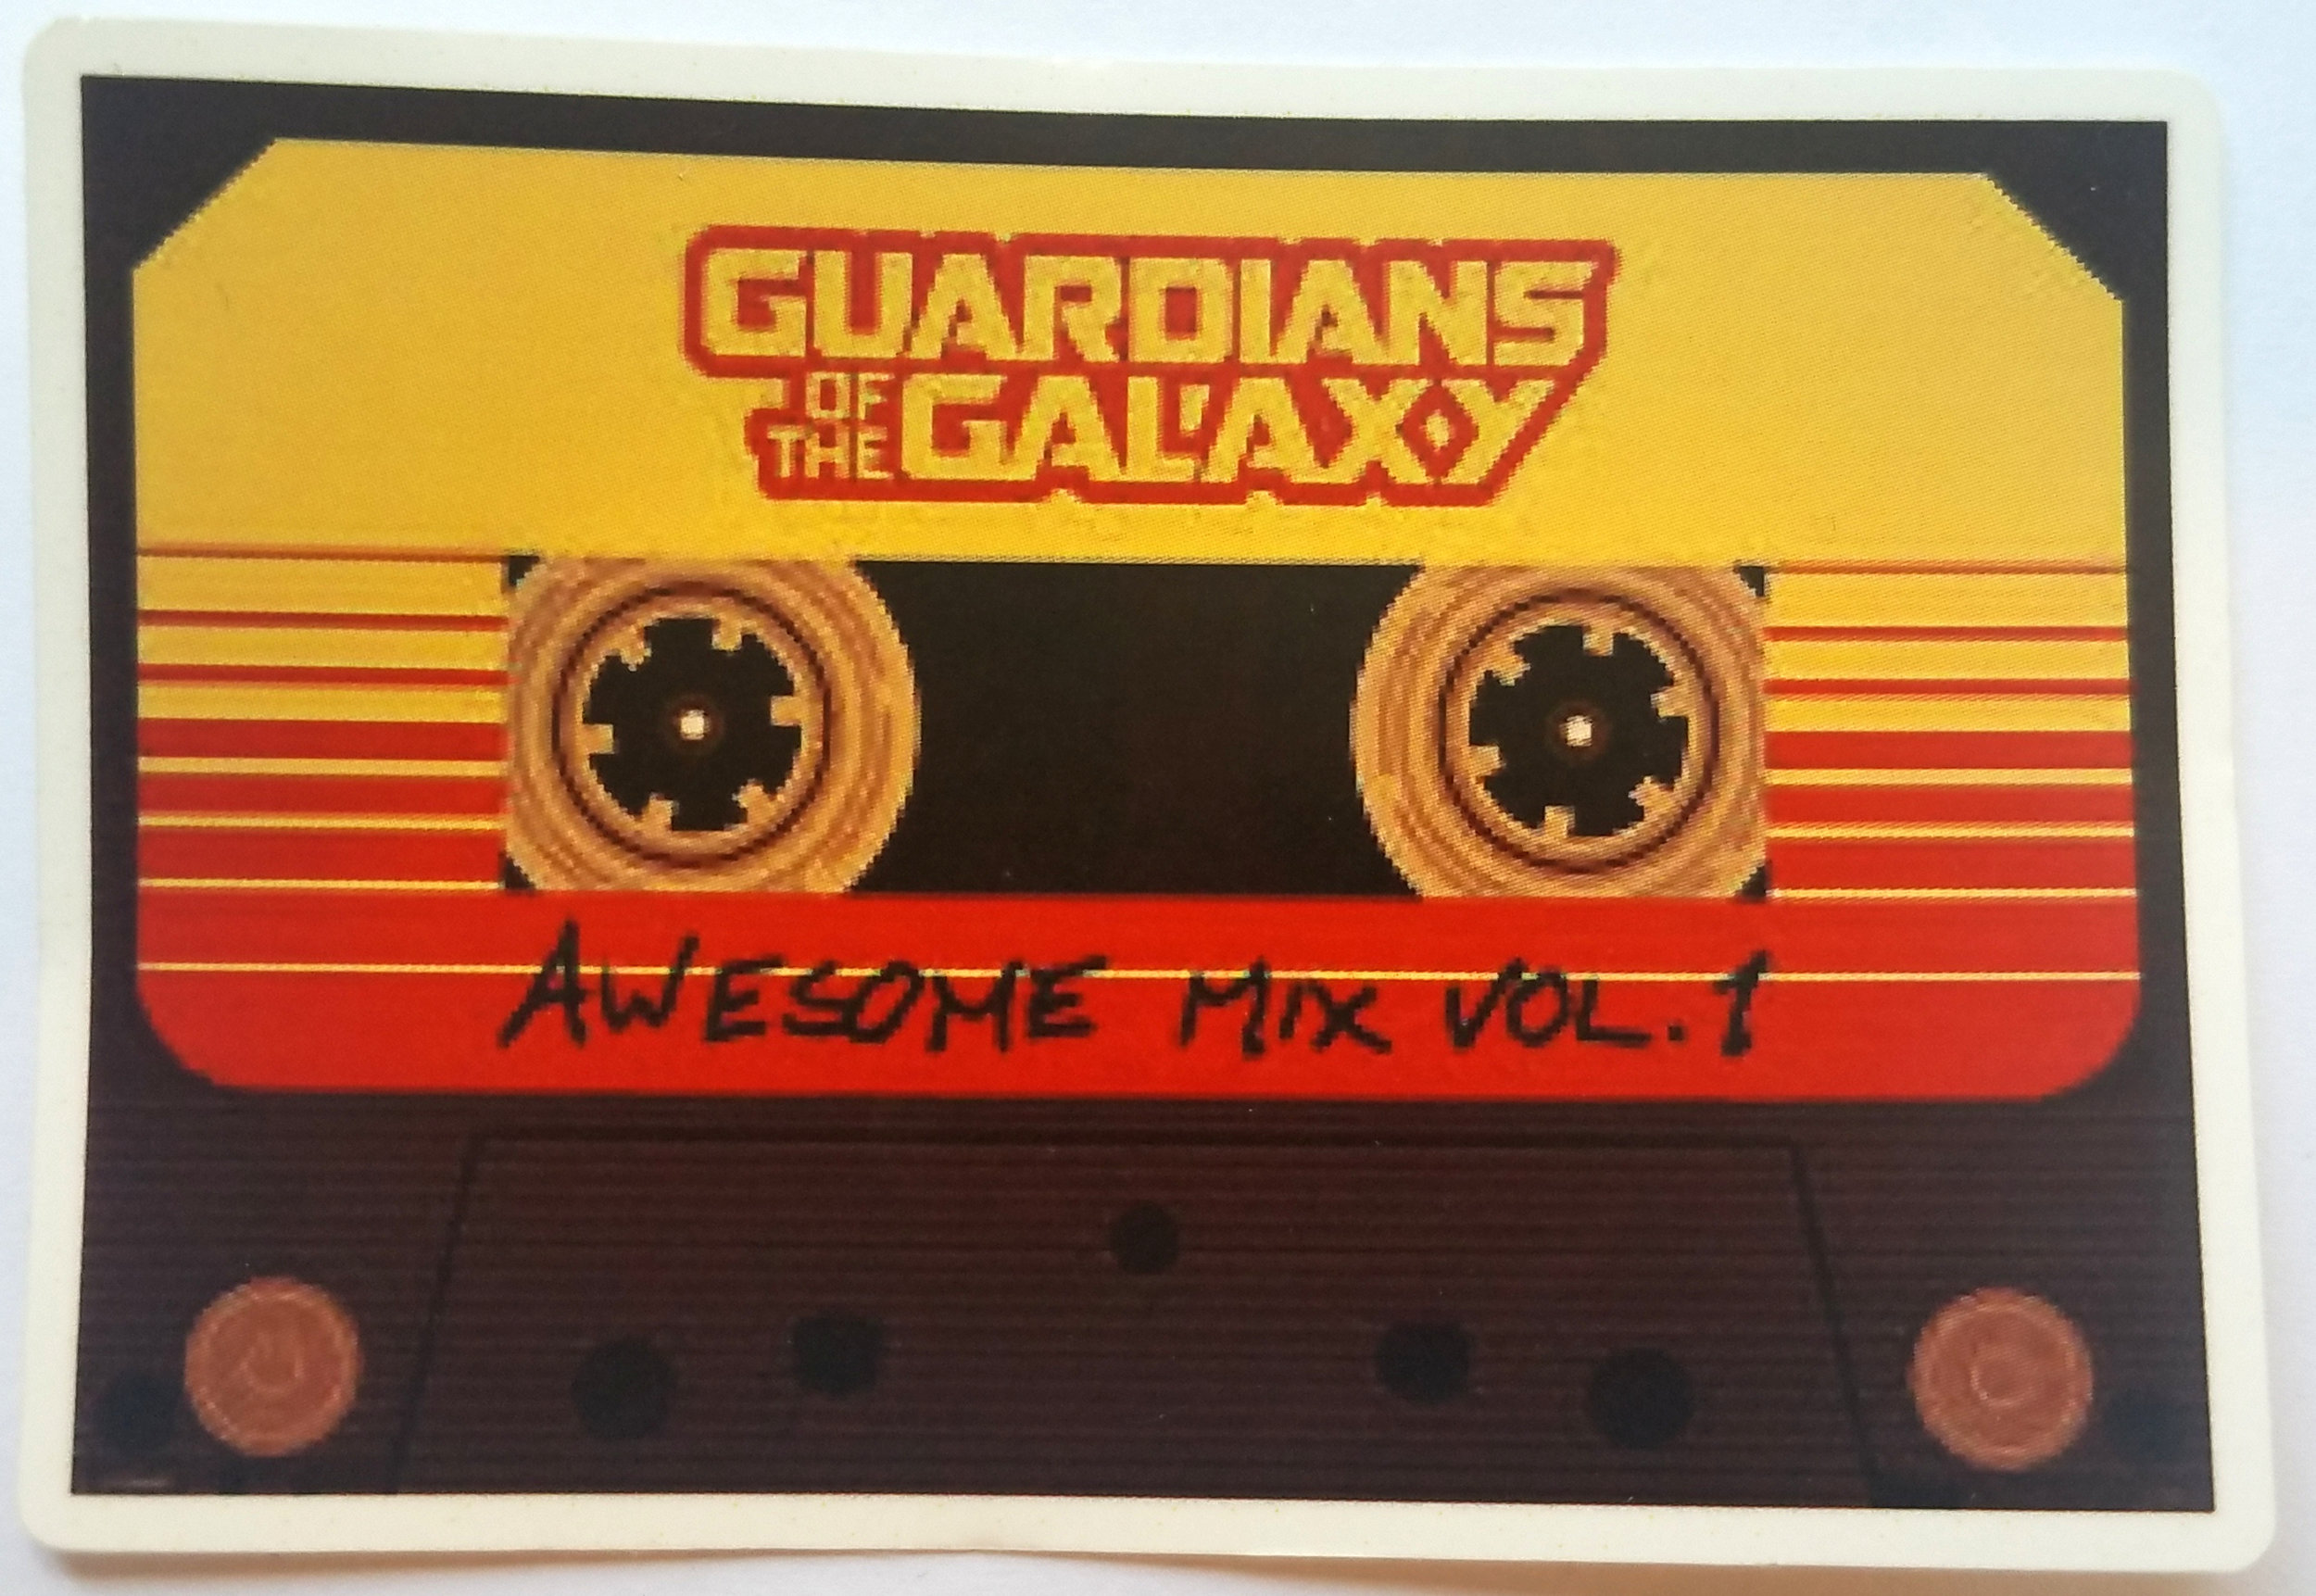 bryst fordrejer sirene Awesome Mix Vol. 1 - Guardians of the Galaxy Vinyl Sticker — Logan Arch